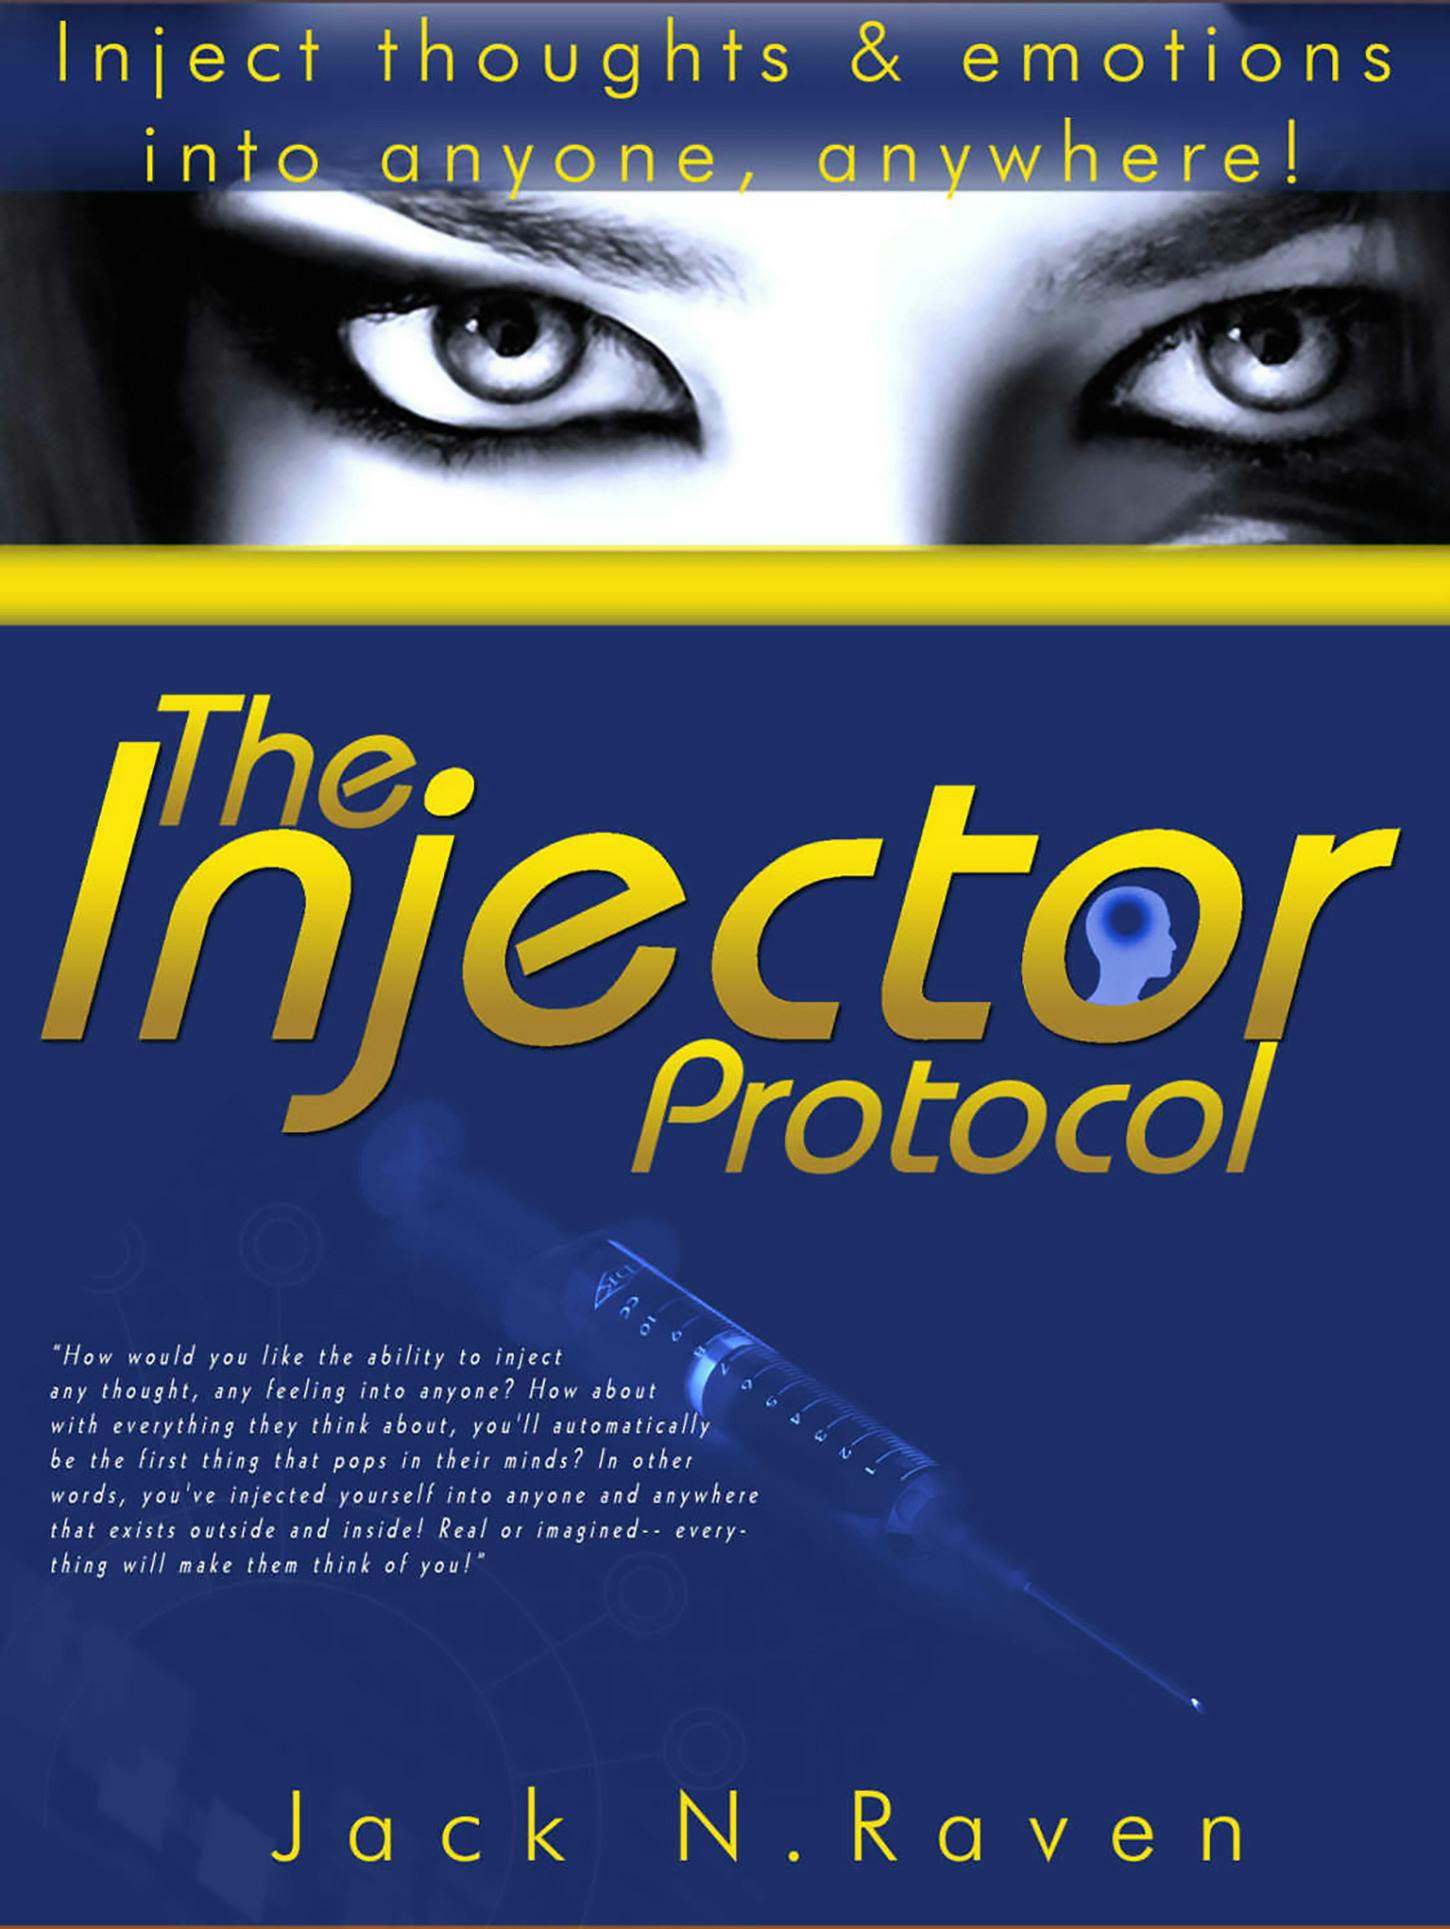 The Injector Protocol: How To Inject Your Essence Literally Into Everything! - Jack N. Raven